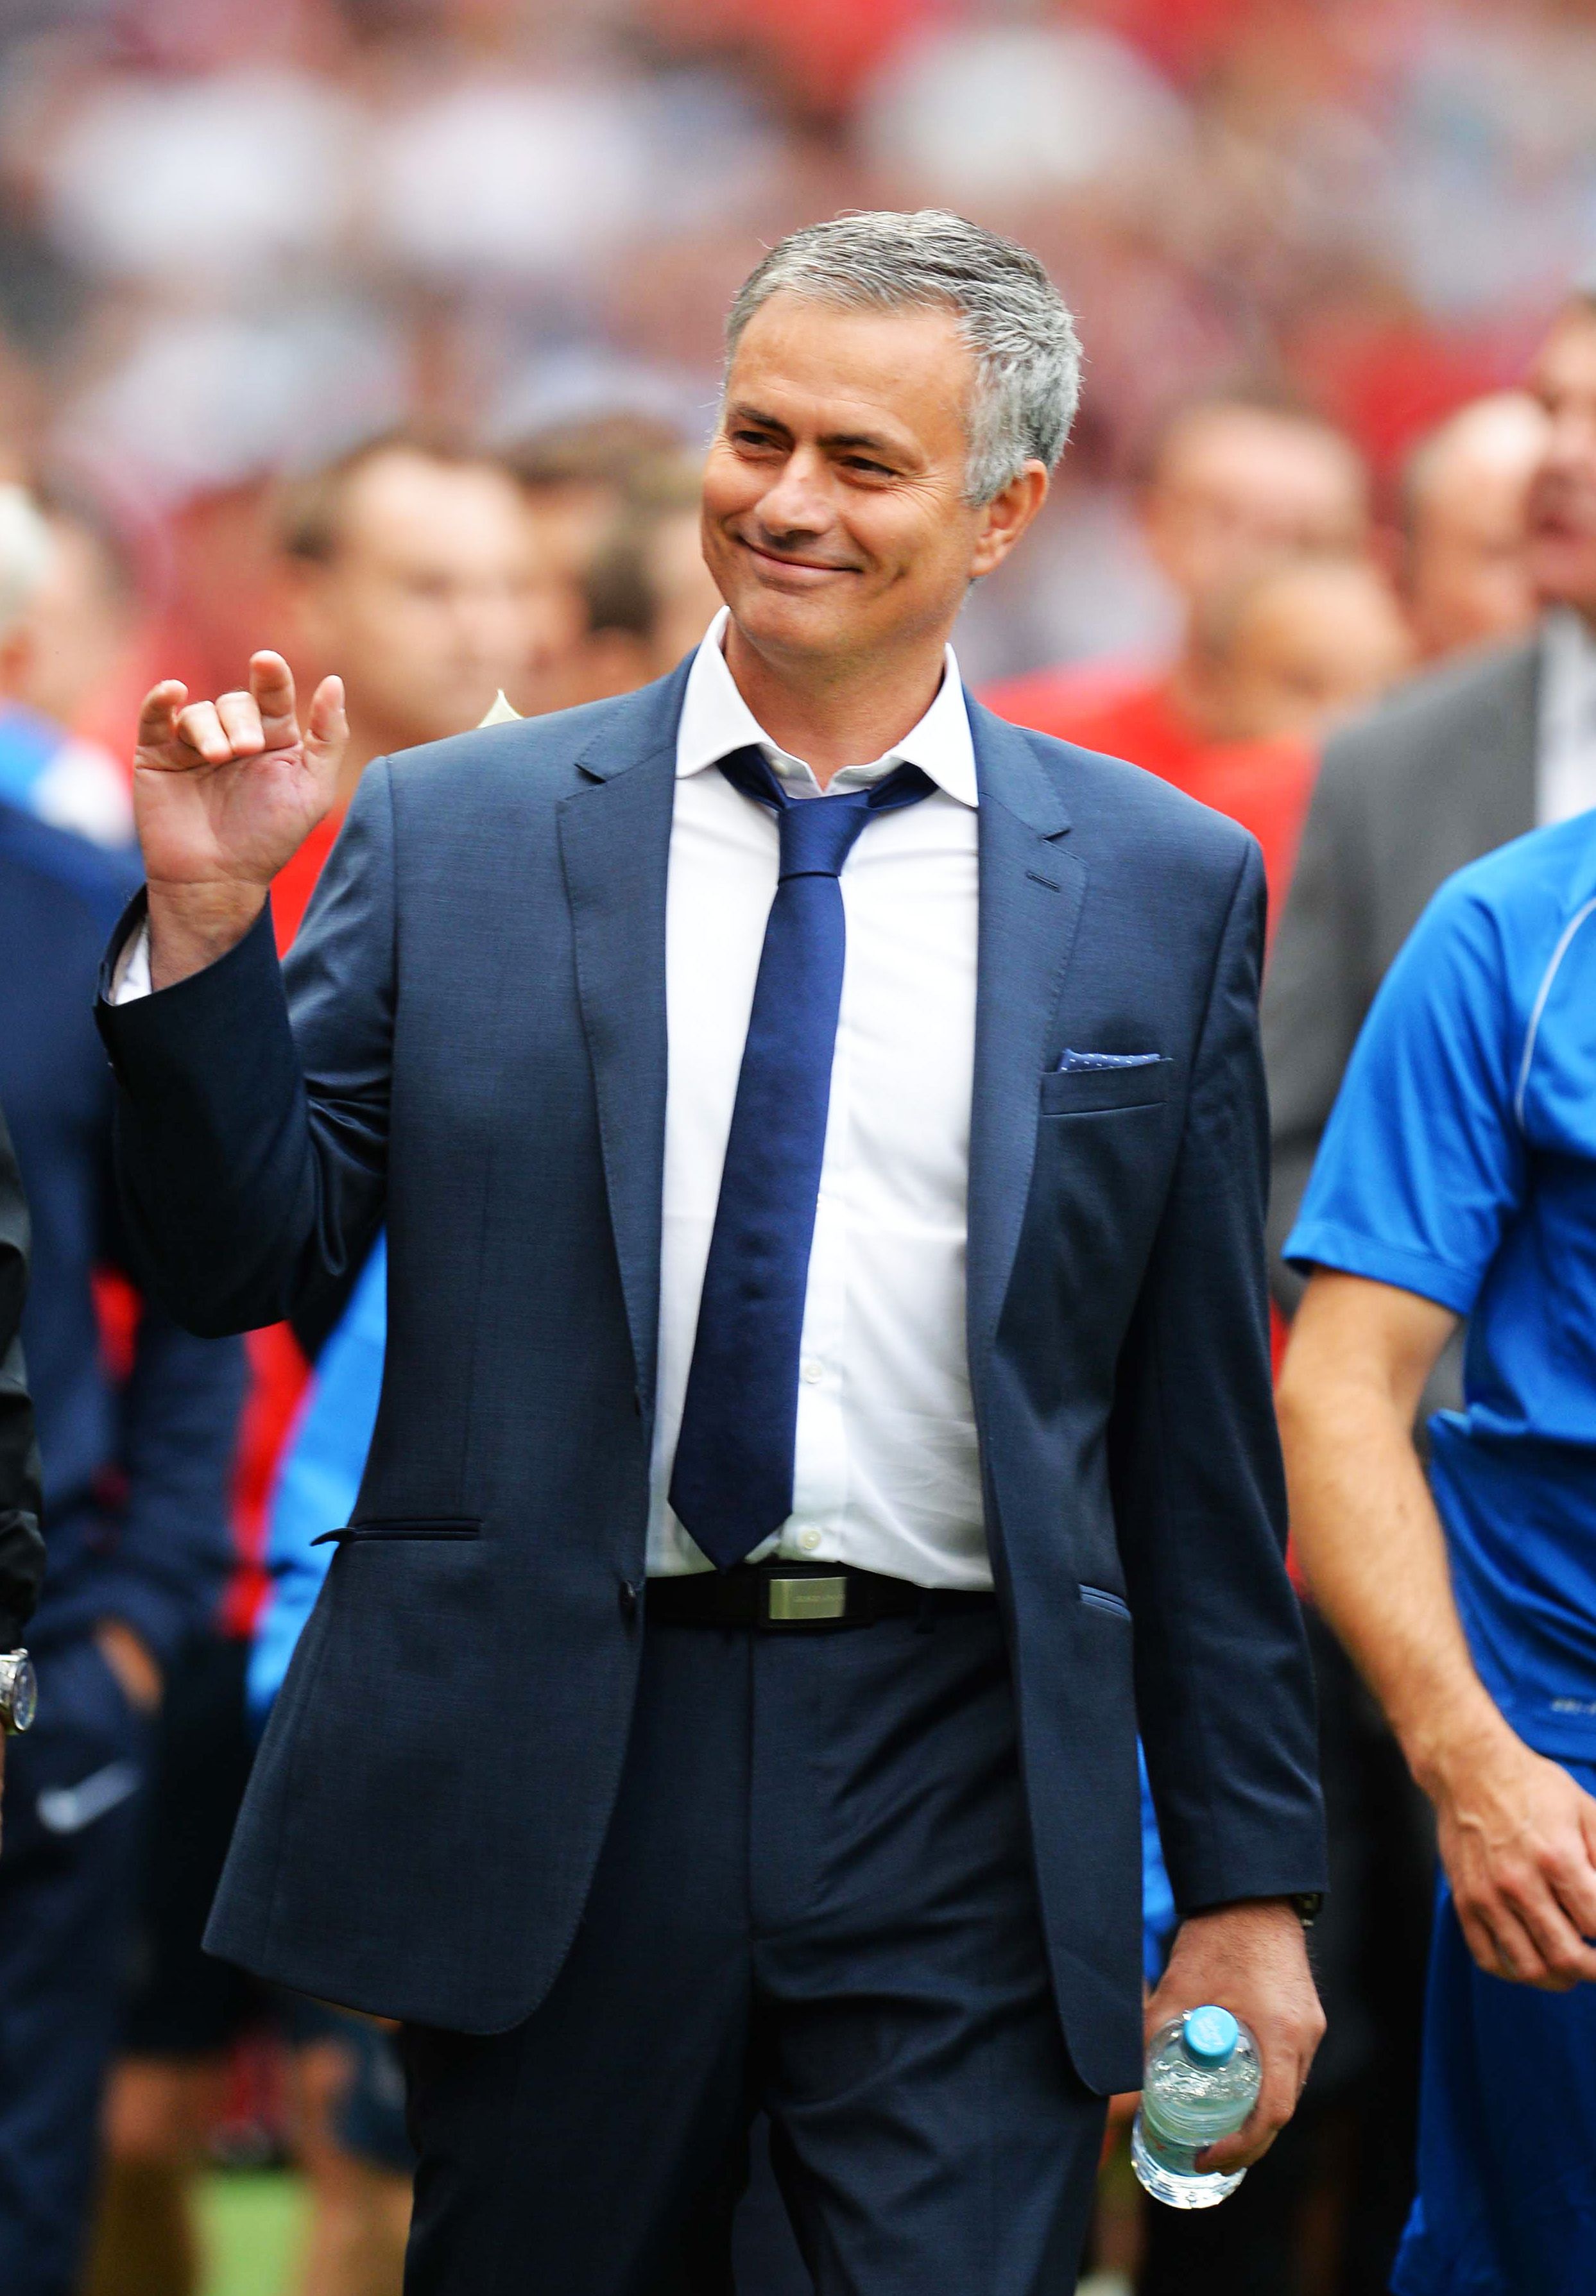 Jose Mourinho wiped out Olly Murs in Soccer Aid 2014. But why did he do it?